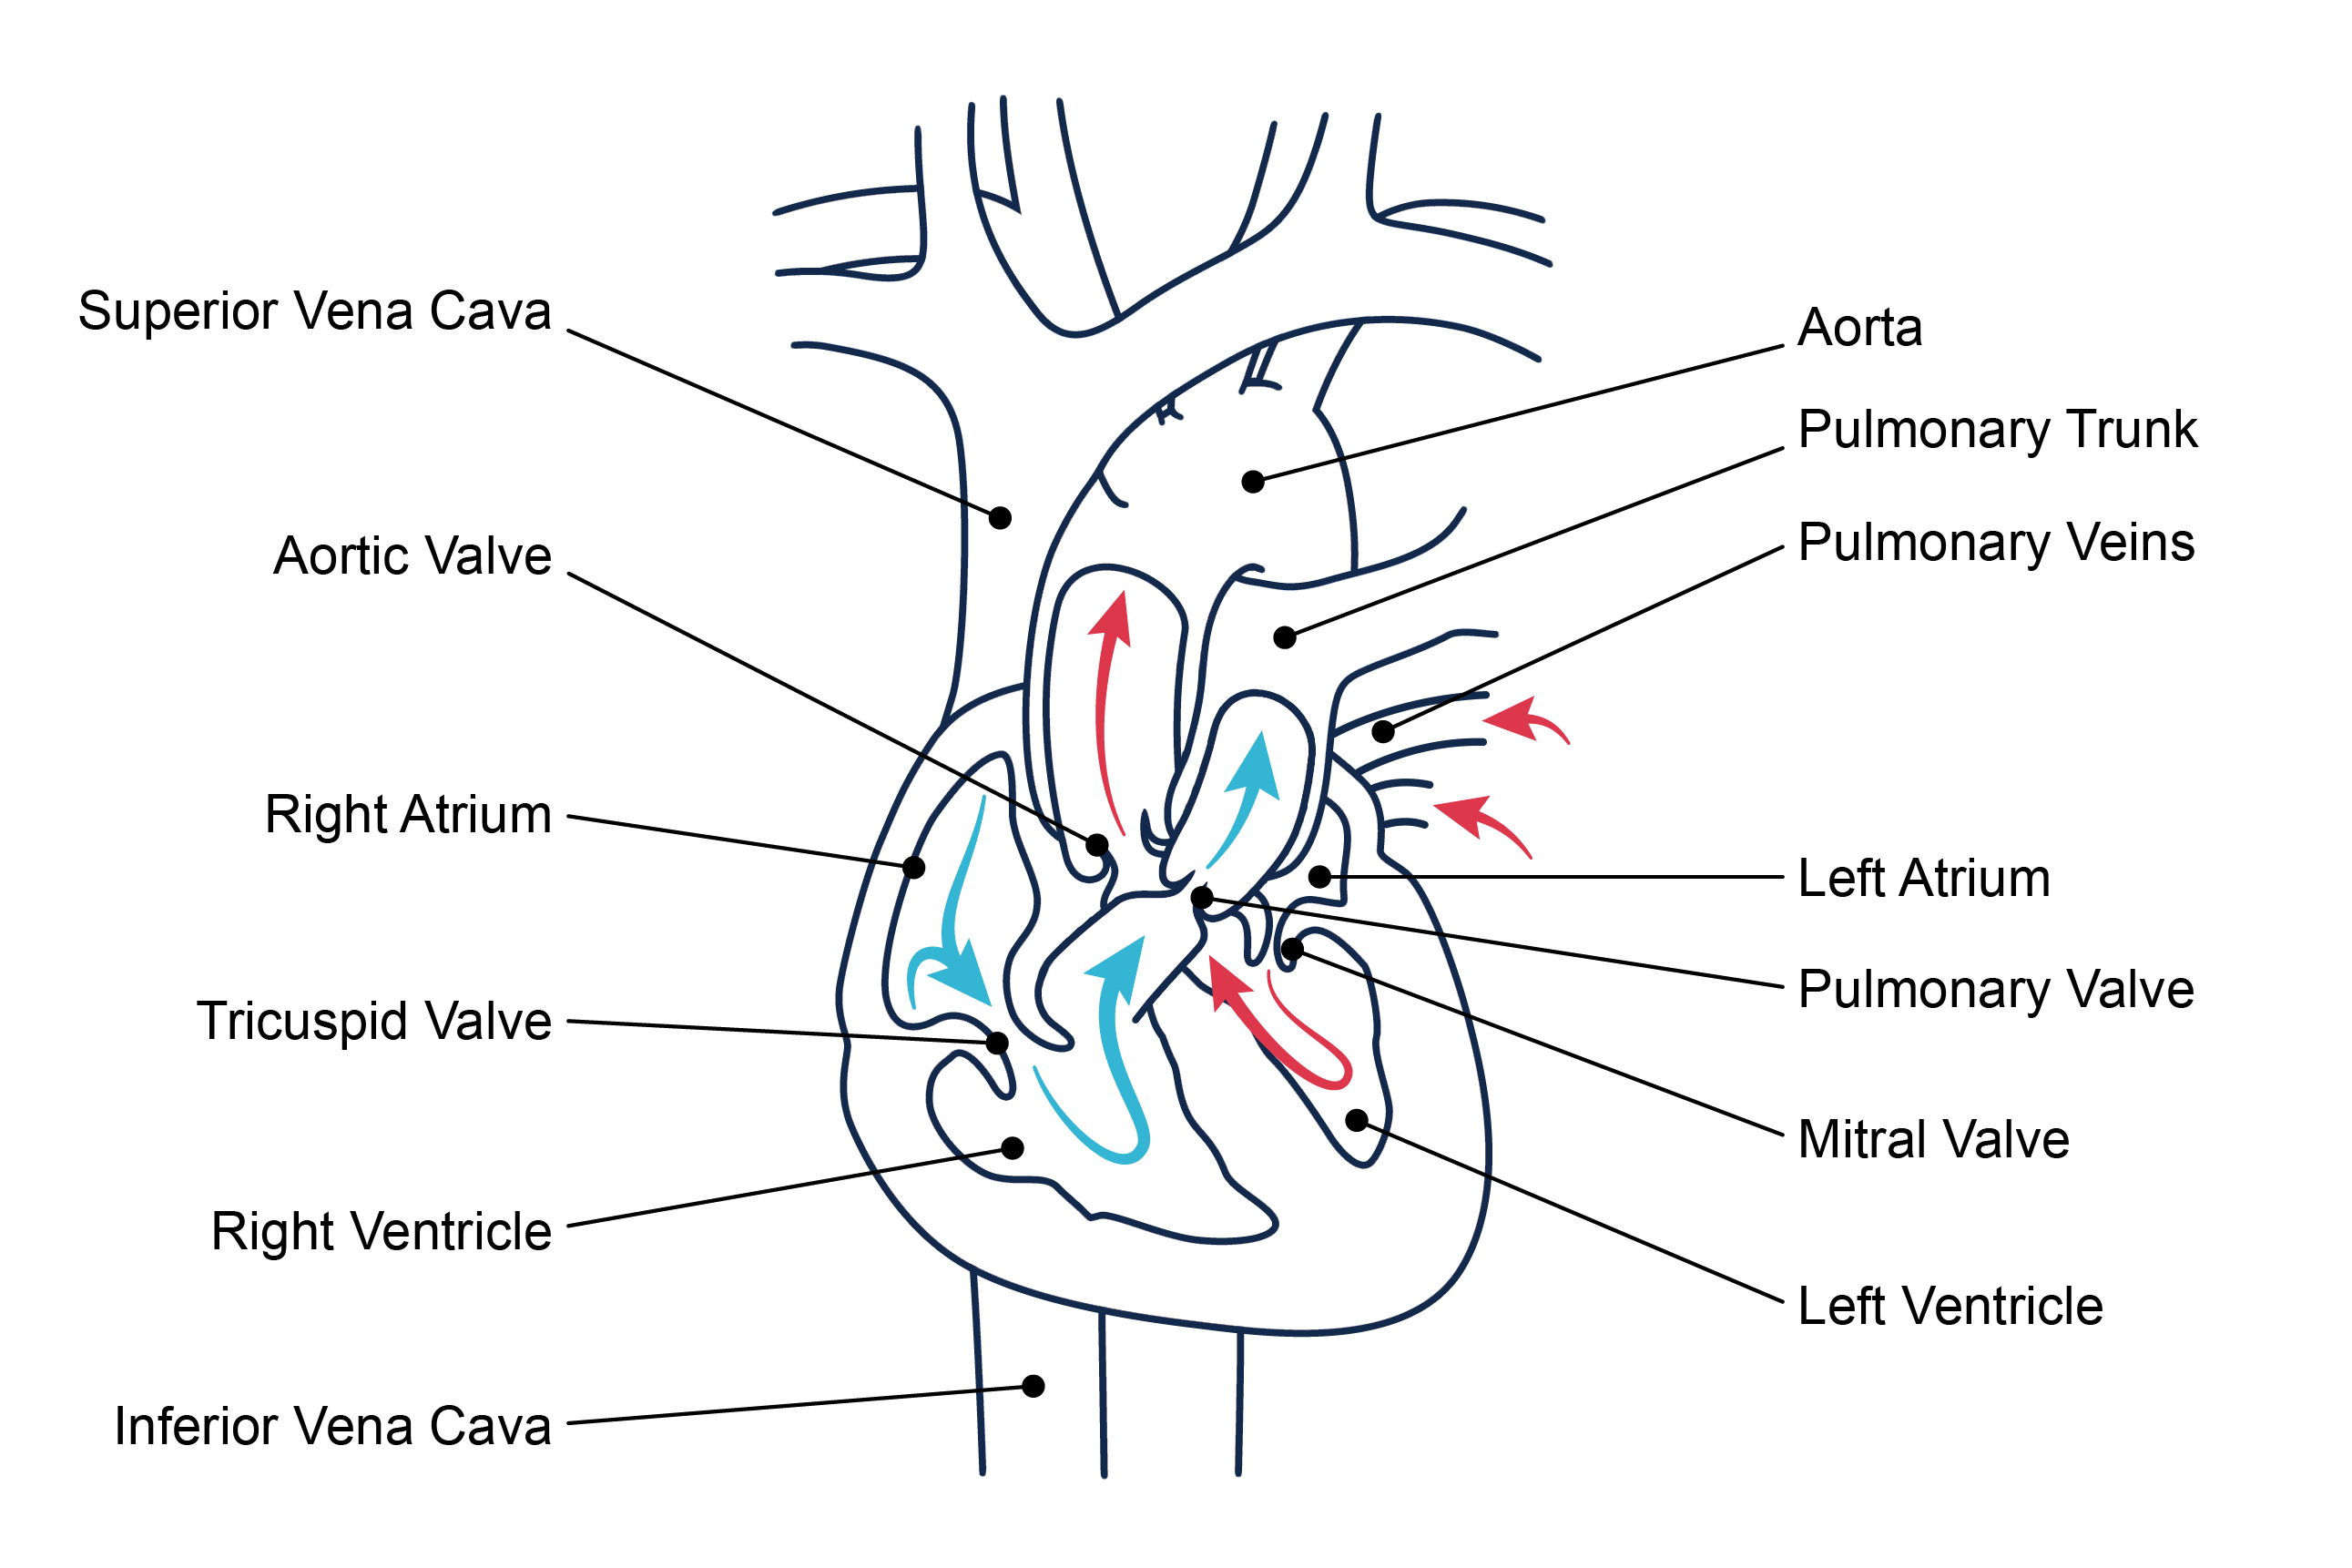 Labeled diagram of bloodflow through the heart